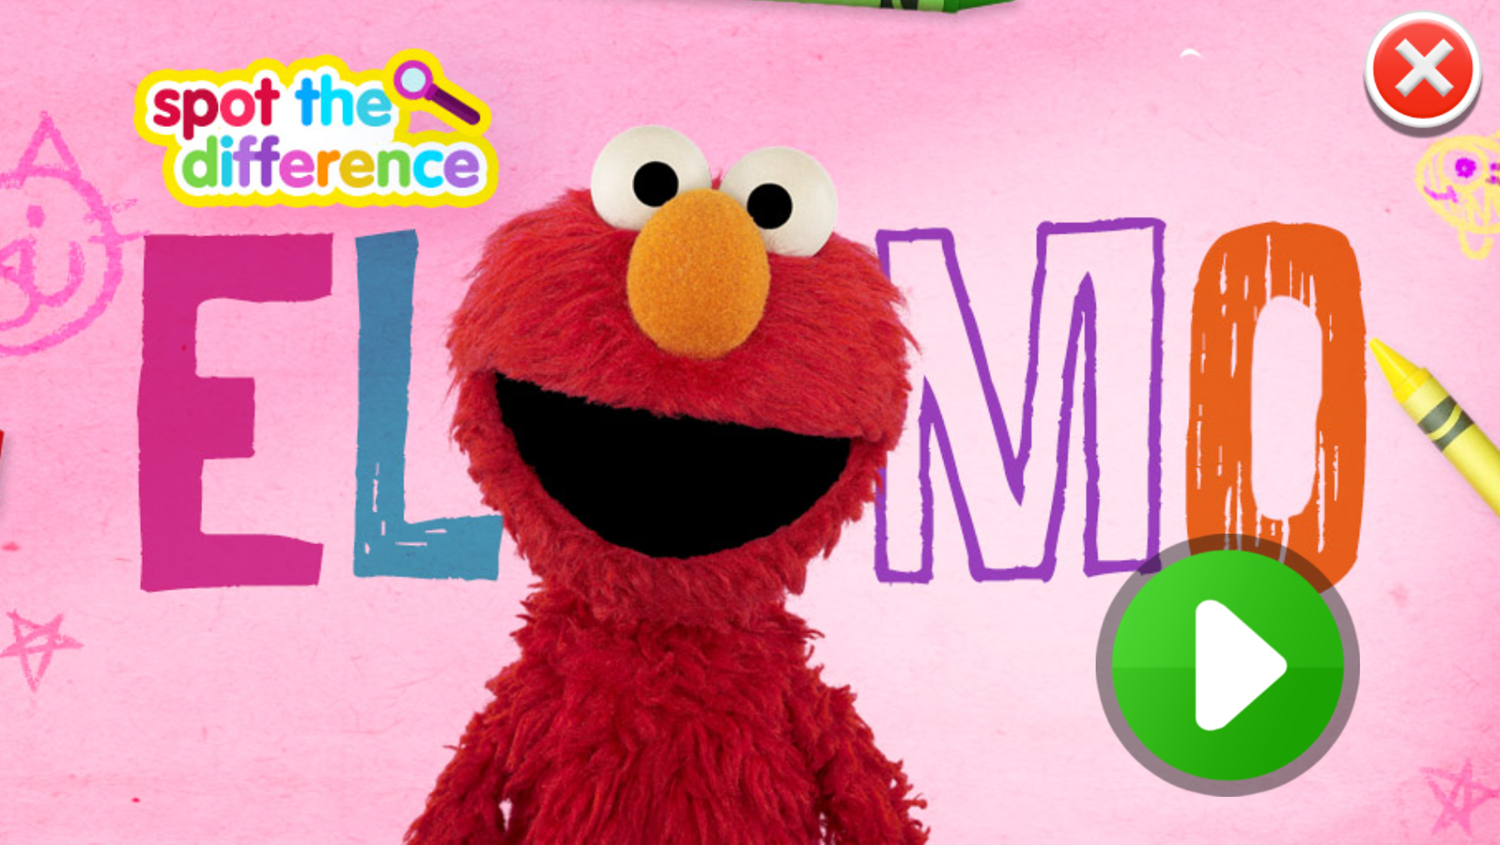 Sesame Street Spot the Difference Elmo Game Welcome Screen Screenshot.